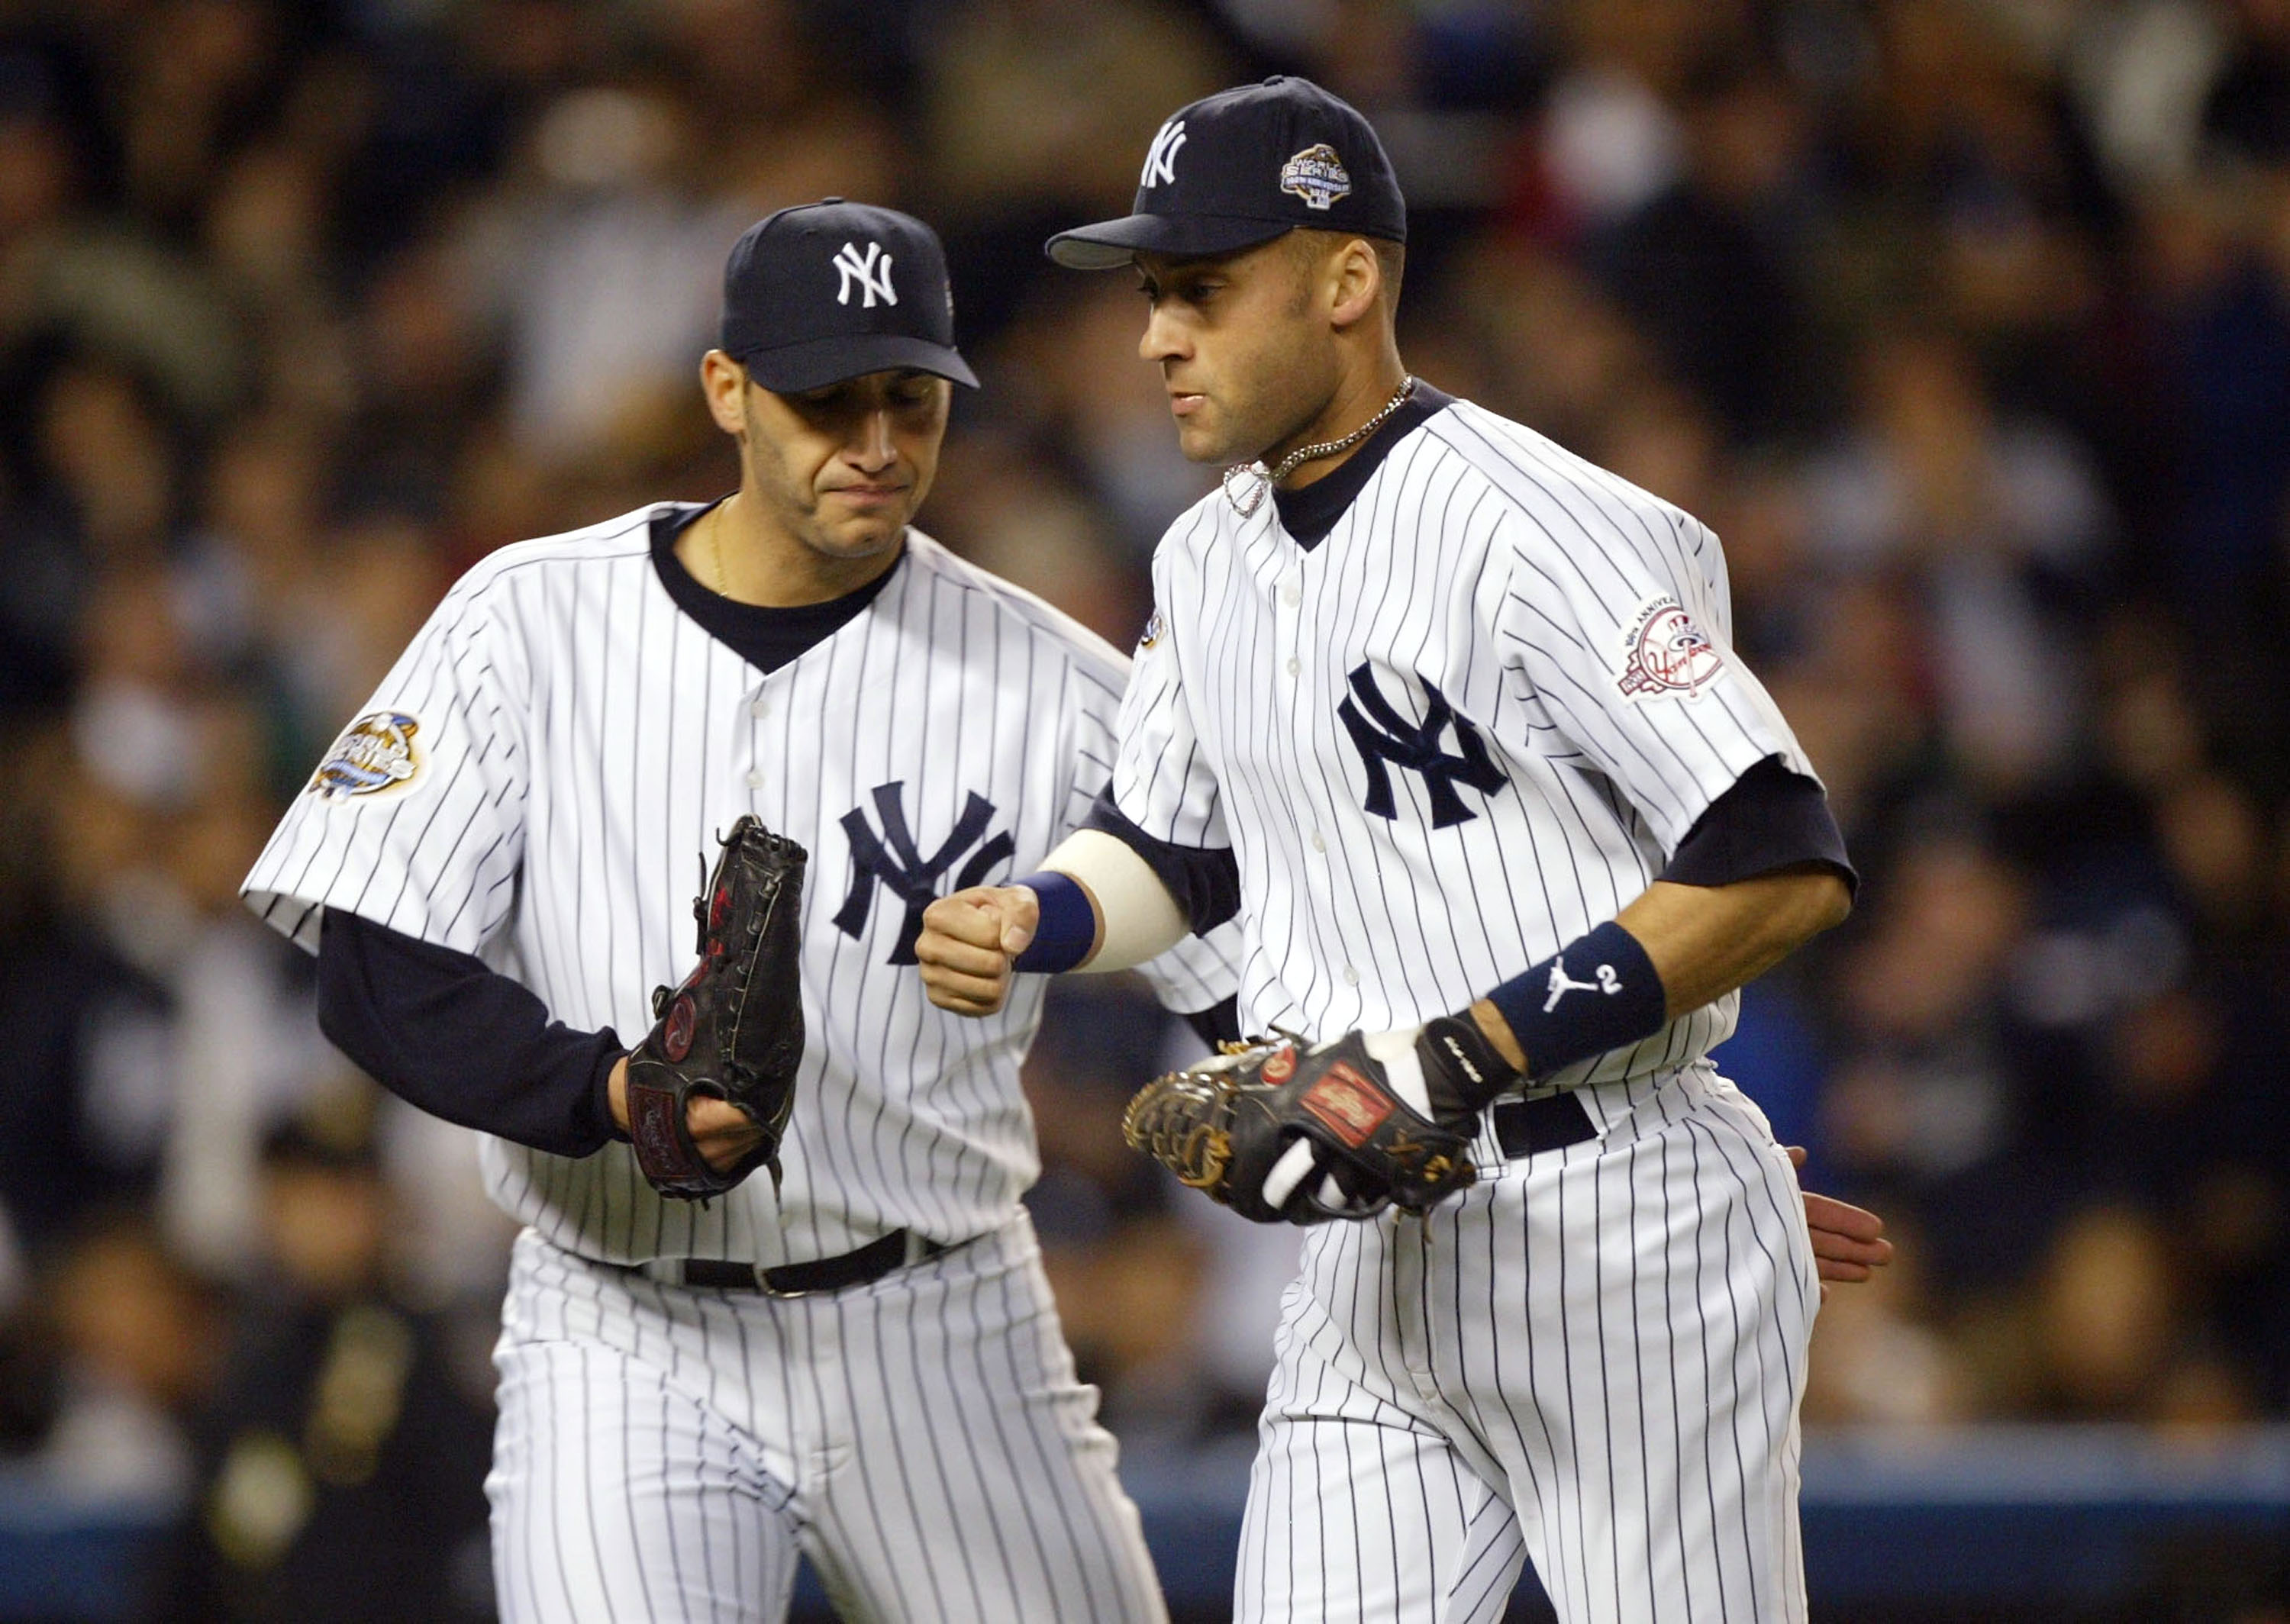 Andy Pettitte's No. 46 to Be Retired by New York Yankees on Aug. 23